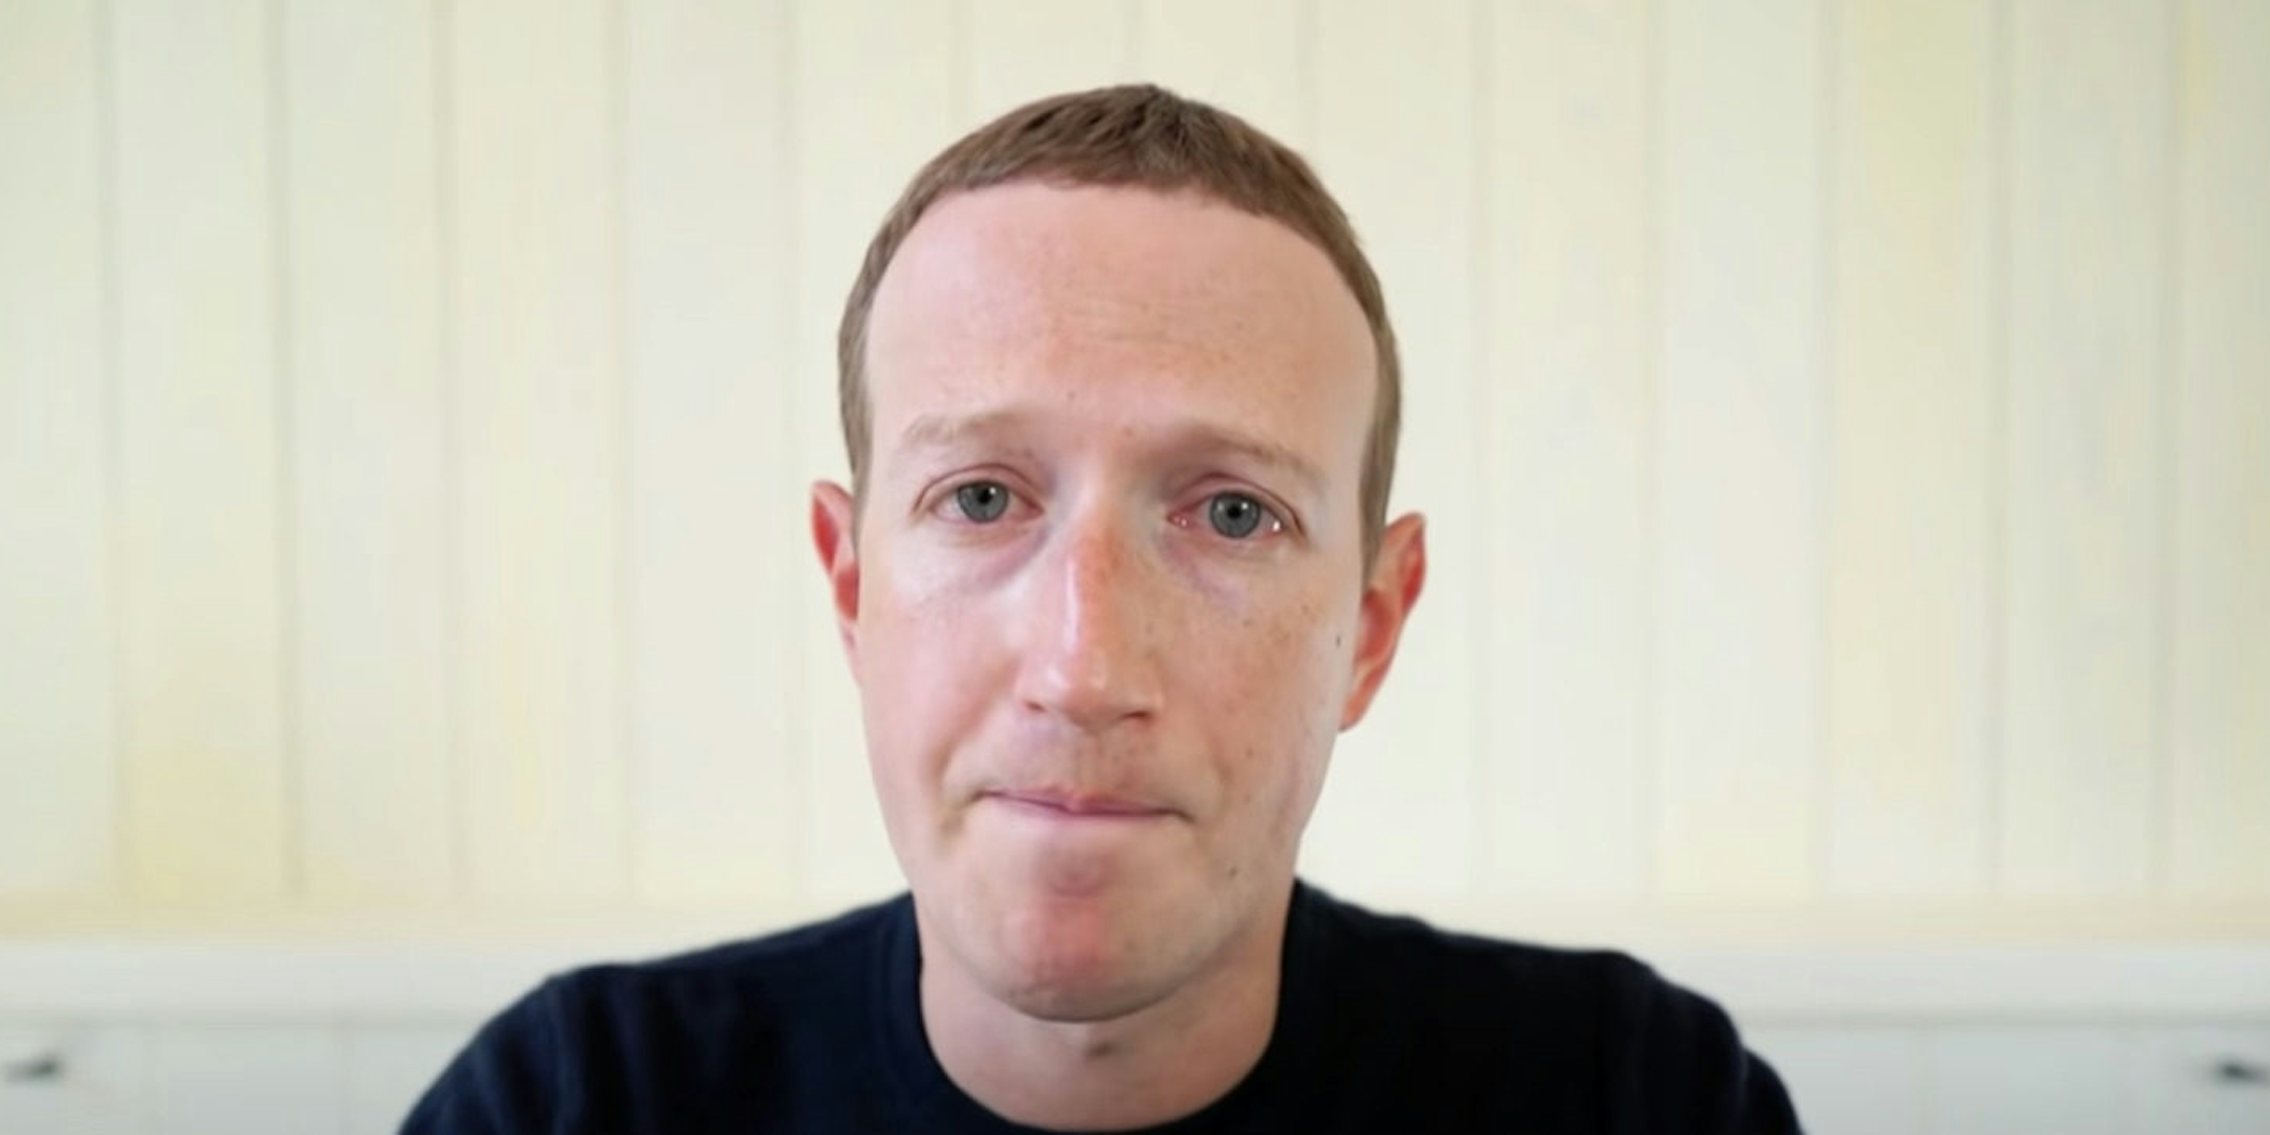 Zuckerberg denies that Facebook is run by the right wing